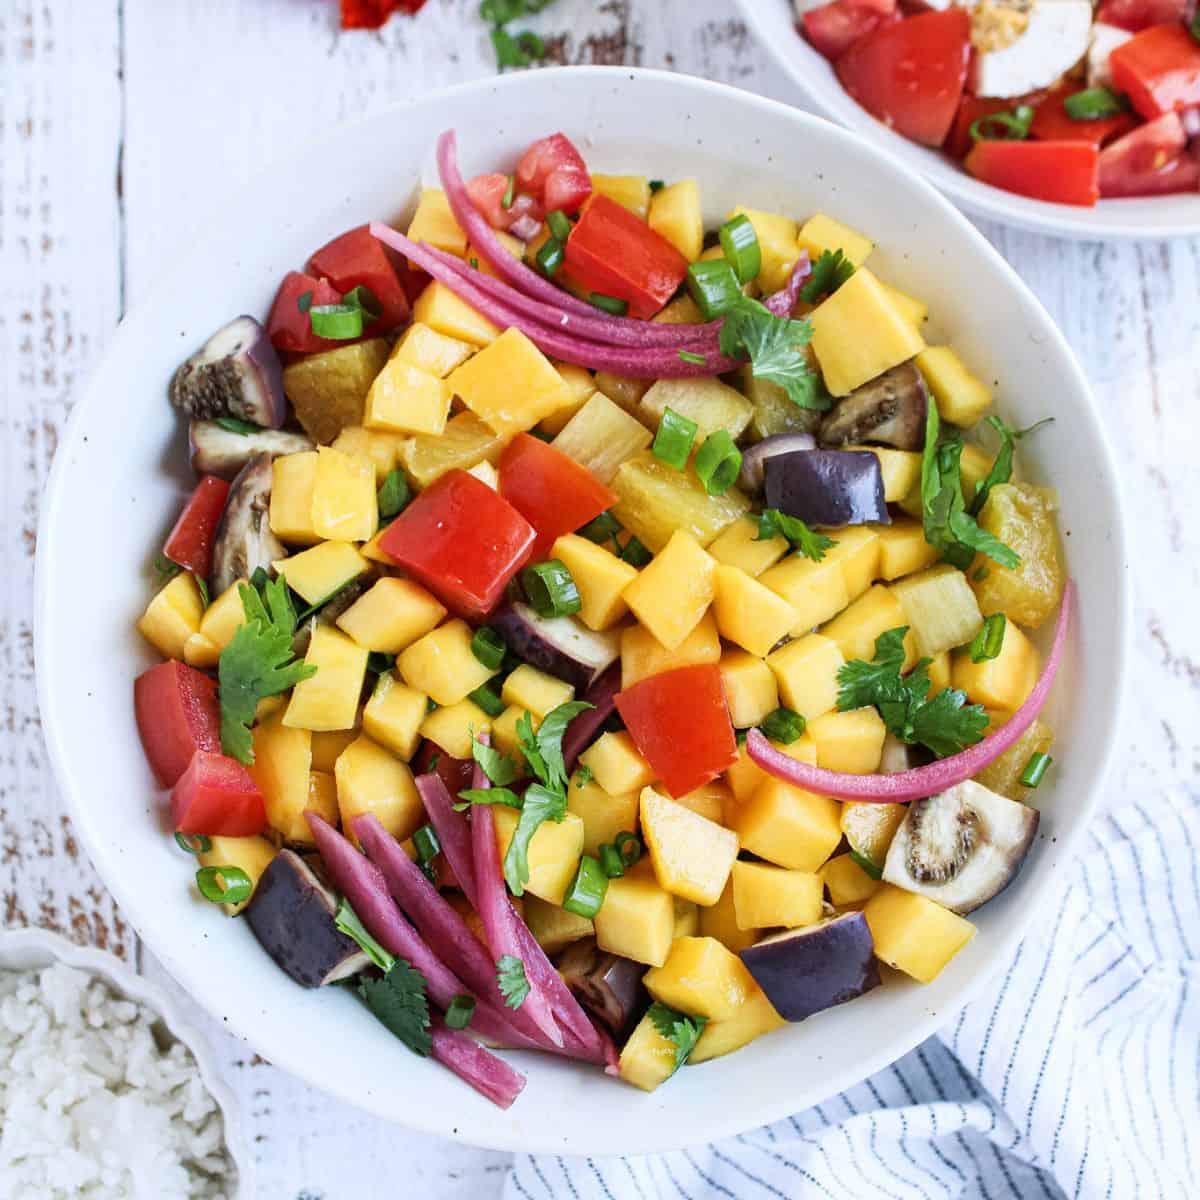 Mango pineapple tomato salad in a bowl, ready to eat.